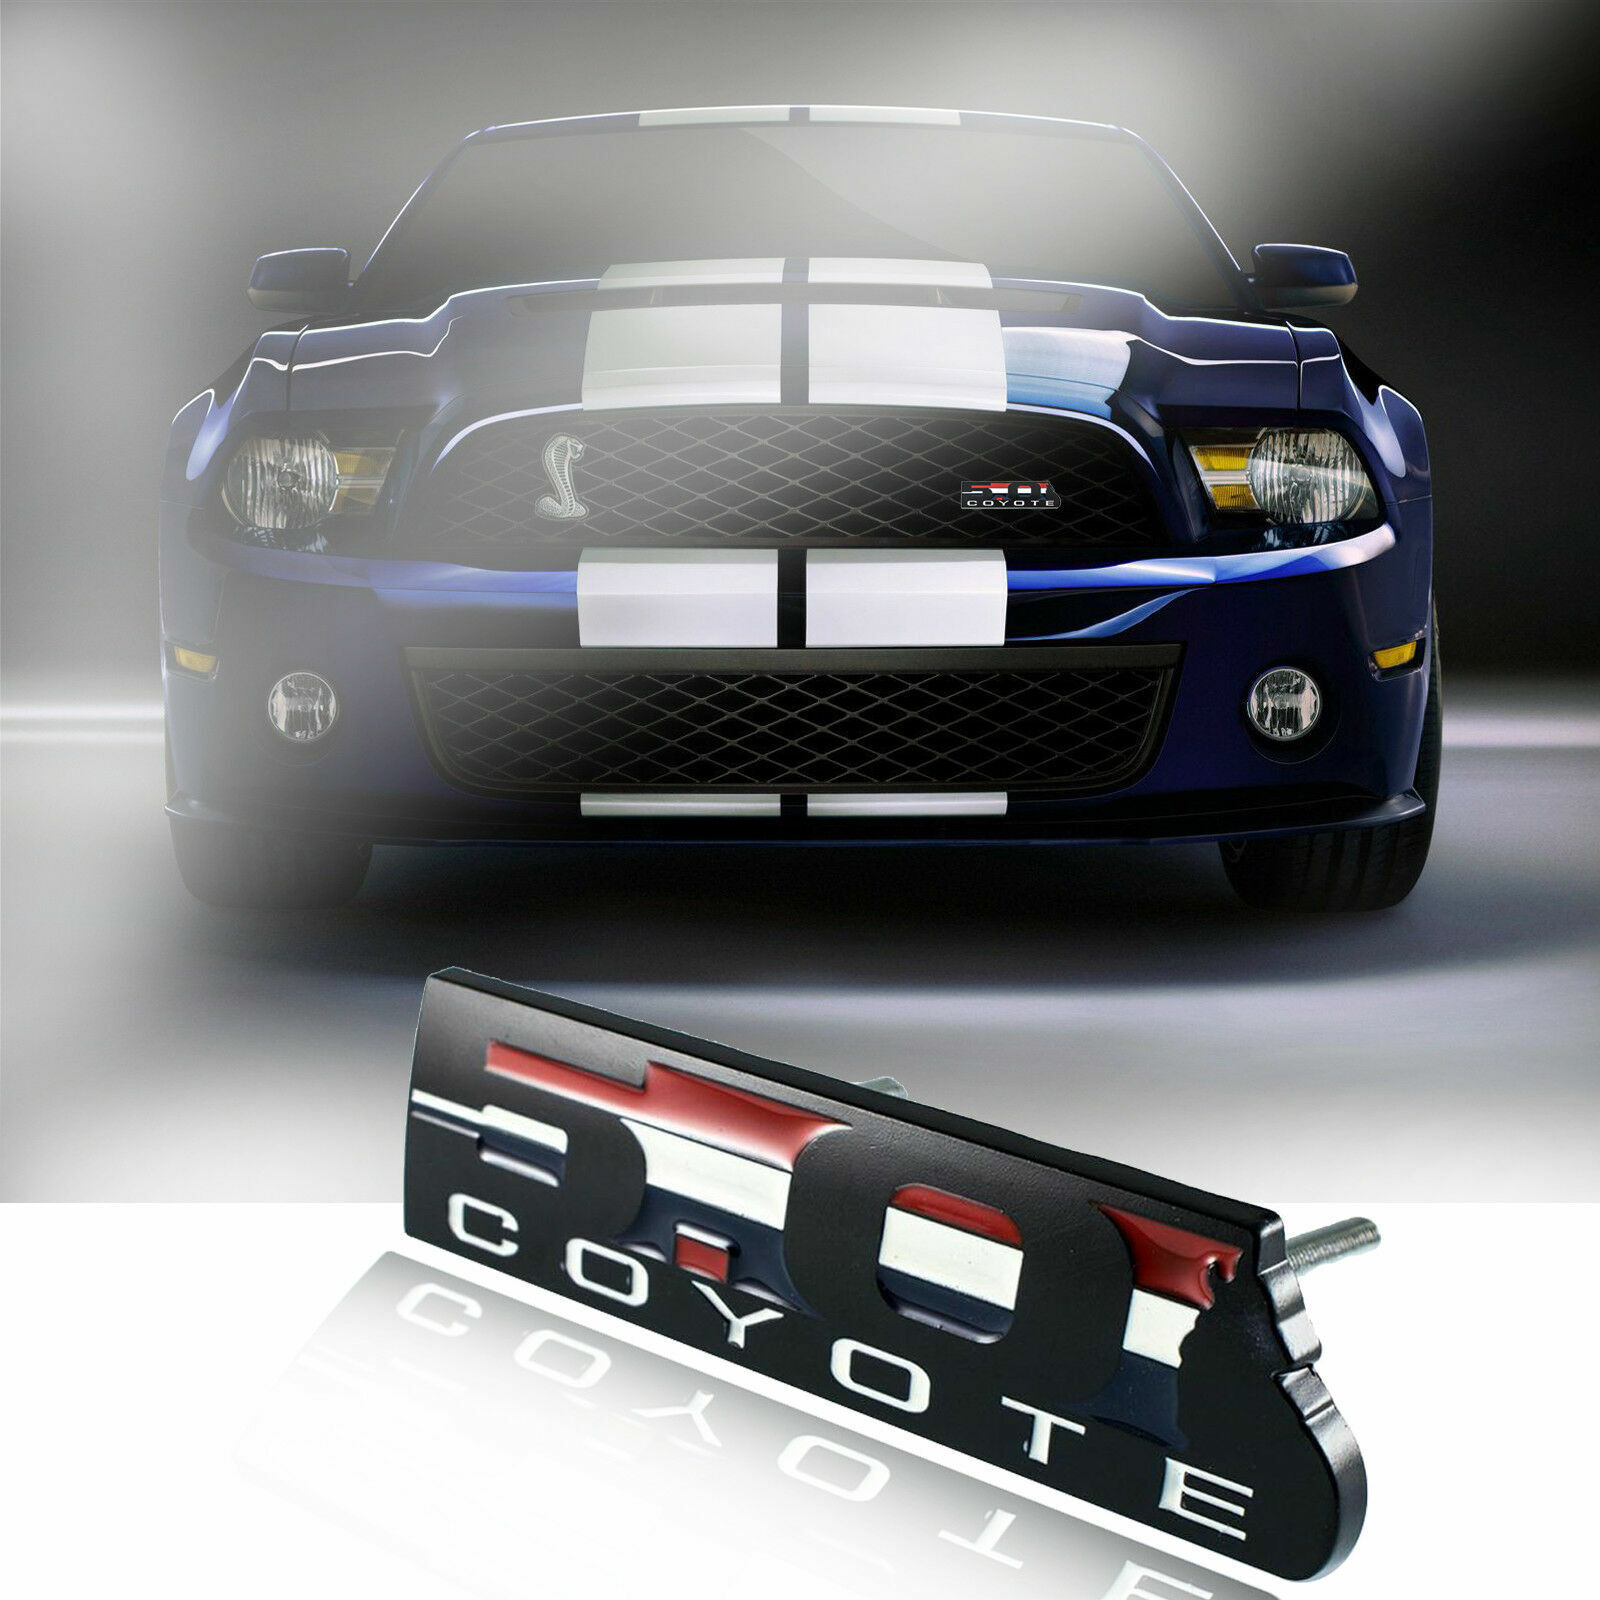 5.0 COYOTE Grille Emblem Badge Fender Rear Sticker Fit Ford Mustang BOSS 302